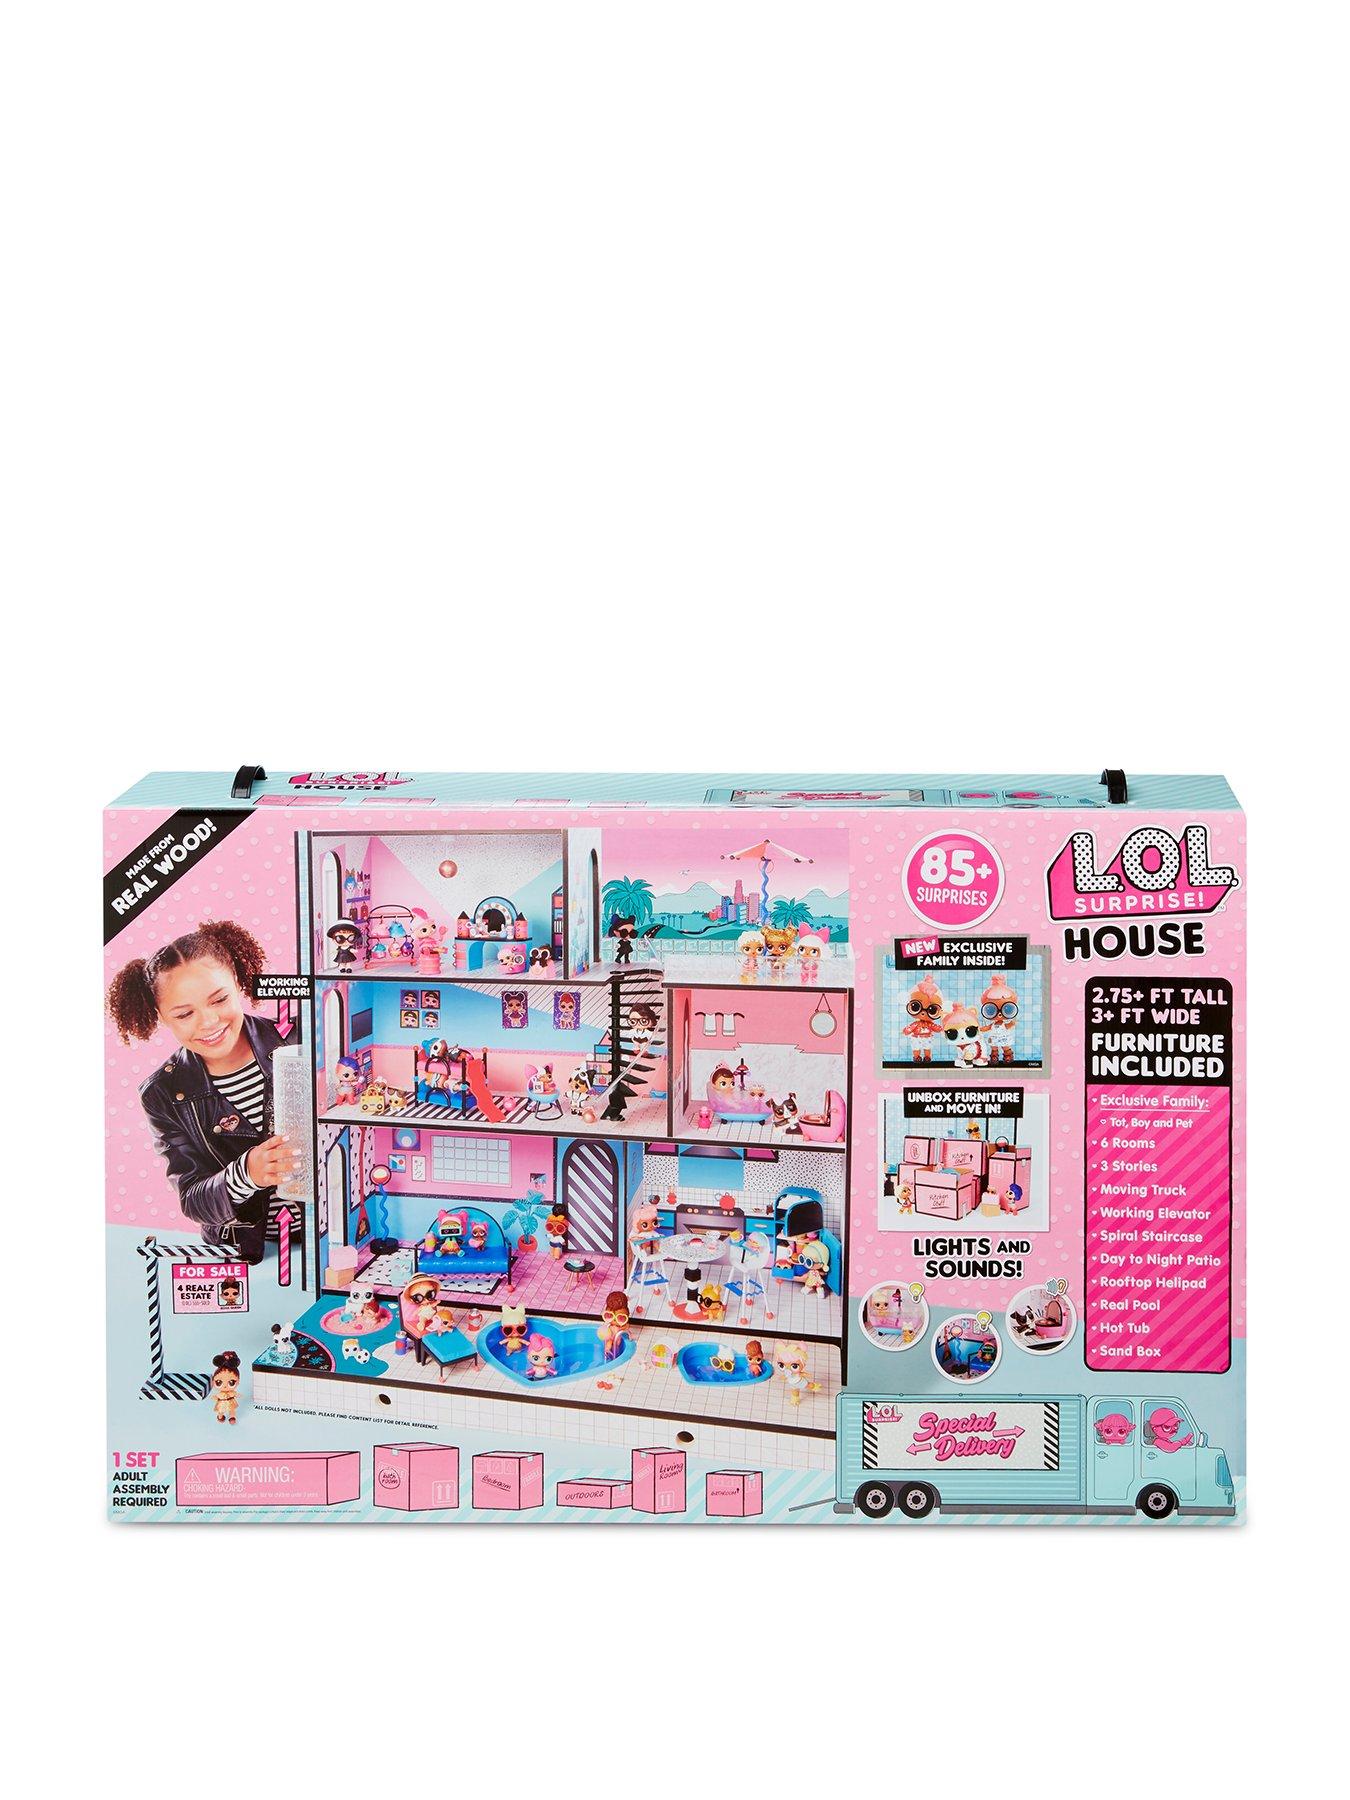 does the lol house come with dolls